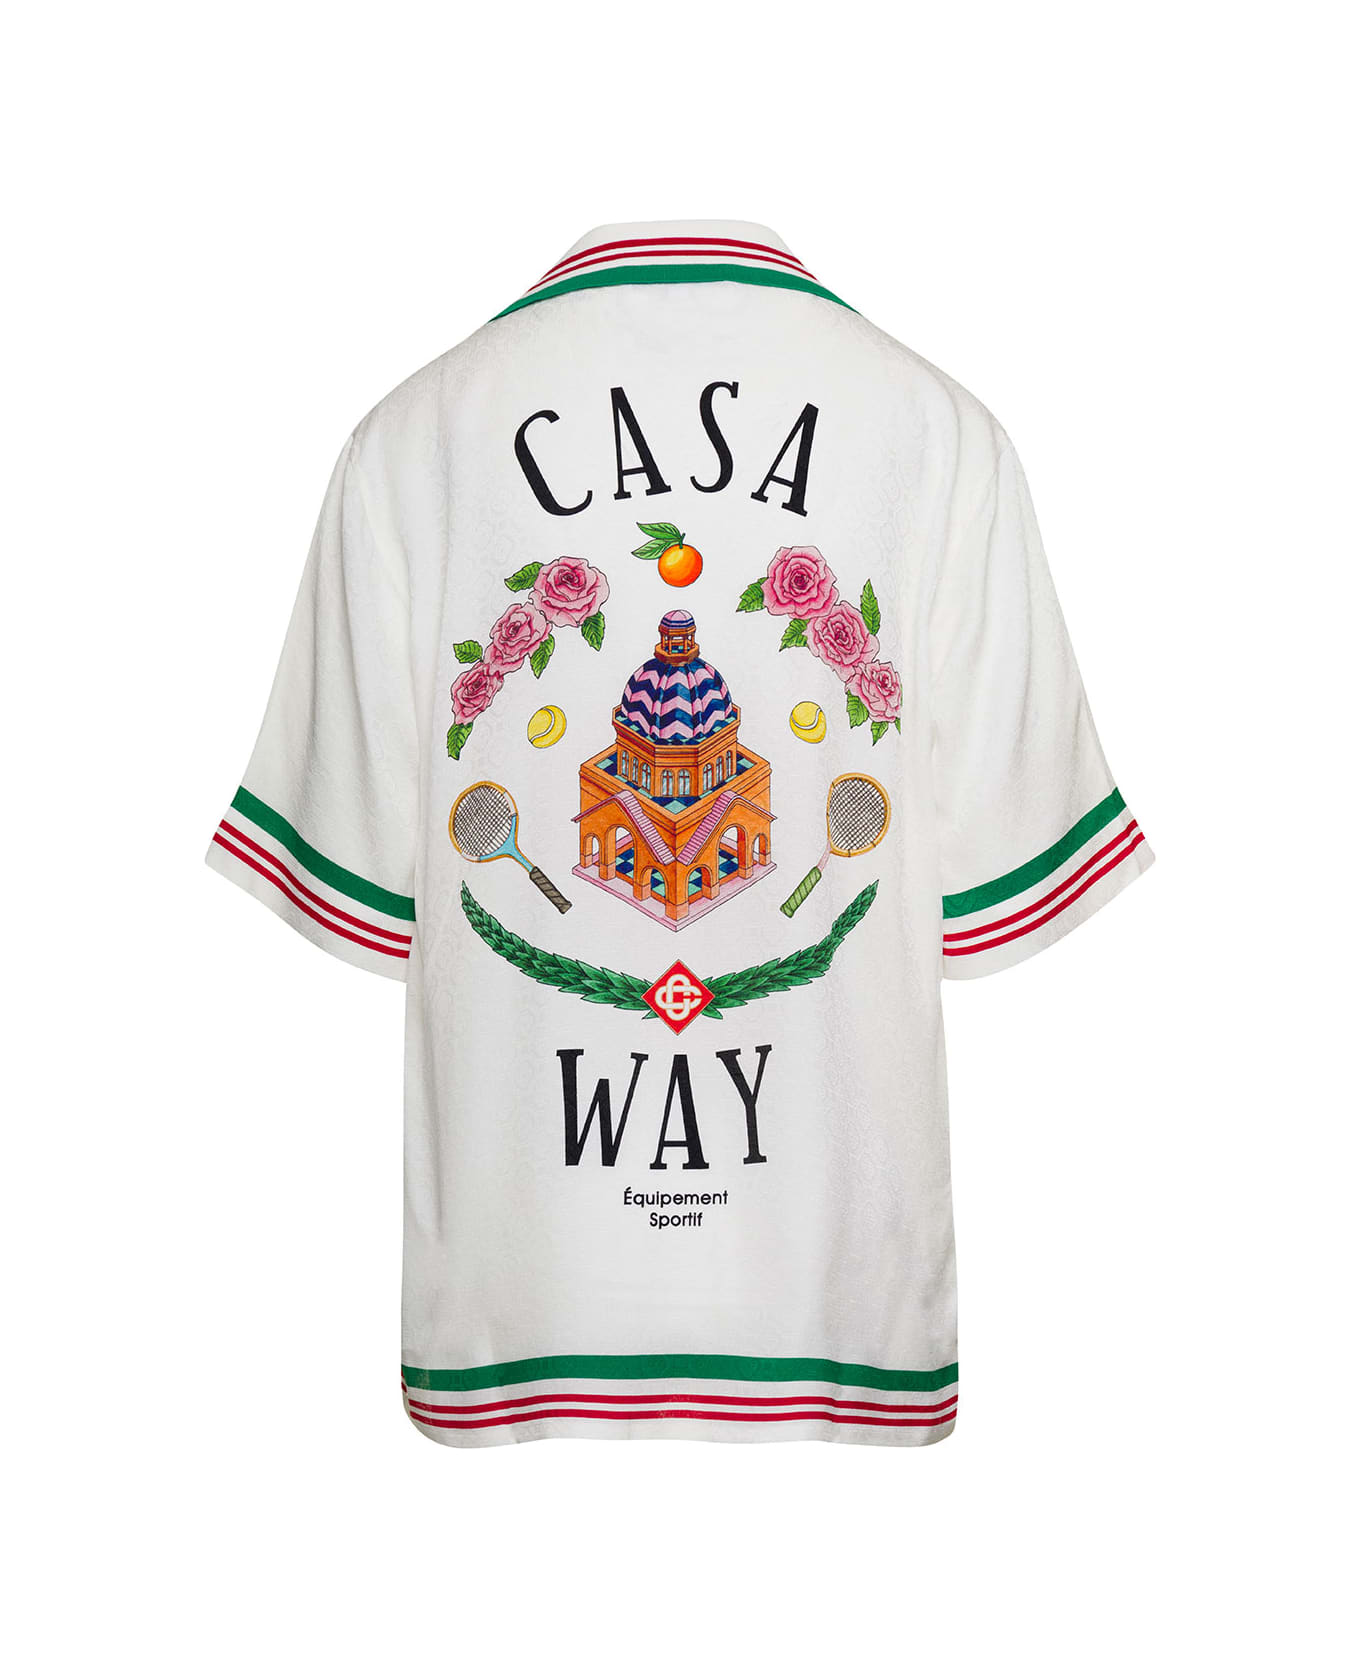 Casablanca White Bowling Shirt With Logo Print And Striped Trim In Silk Woman - White